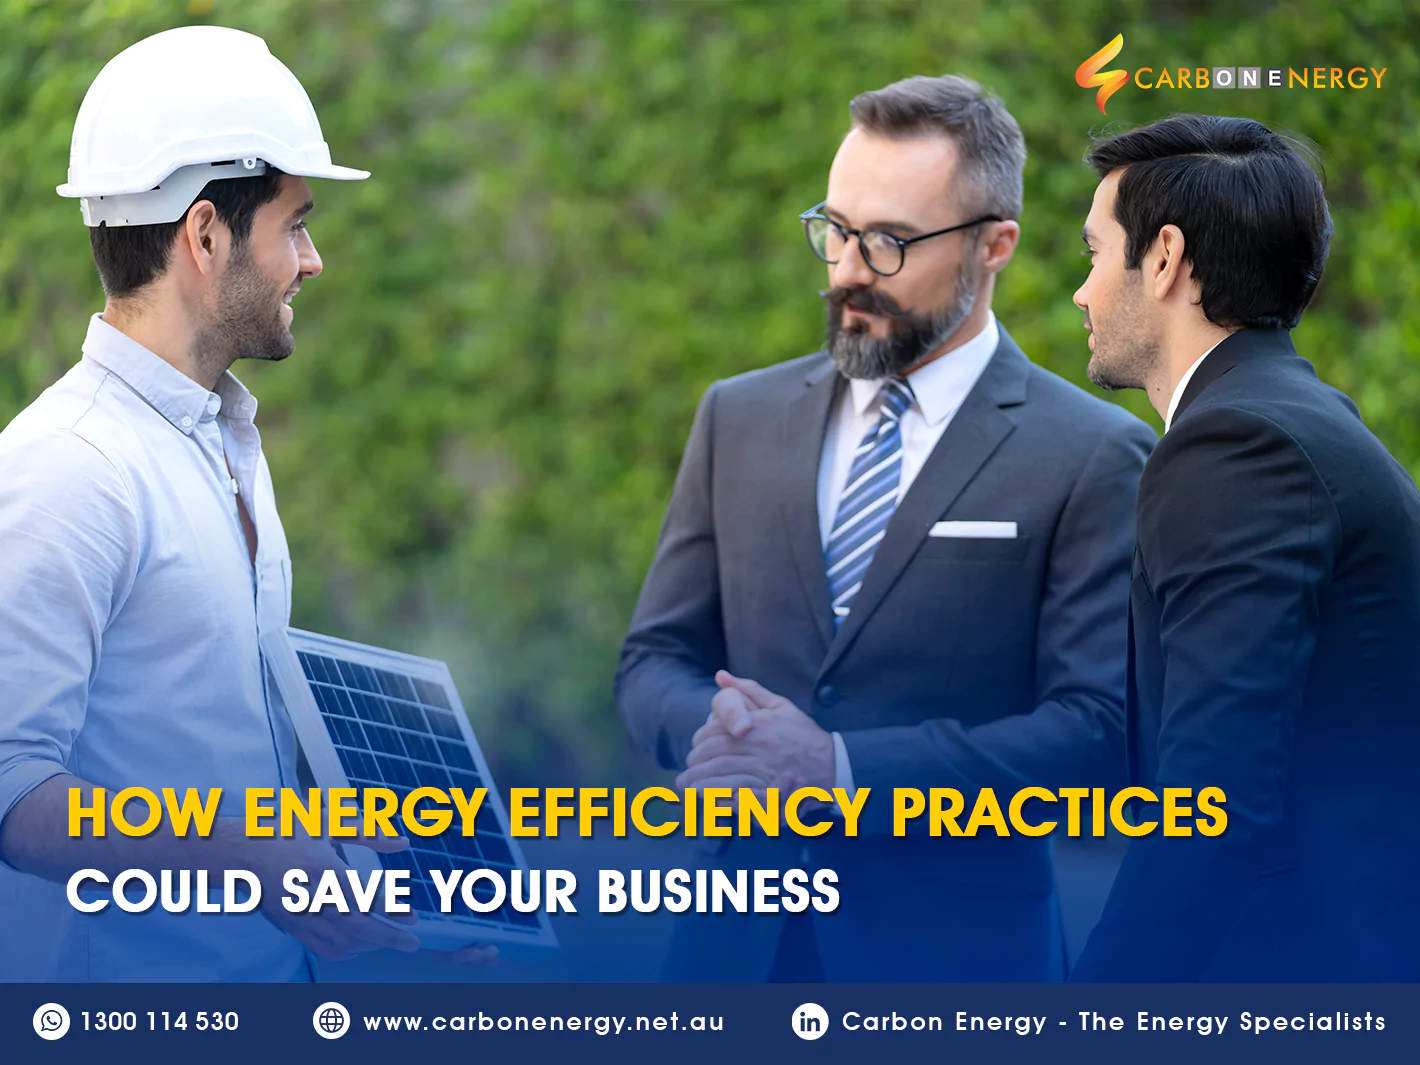 Energy Efficiency Policy to Save Your Business - Carbon Energy